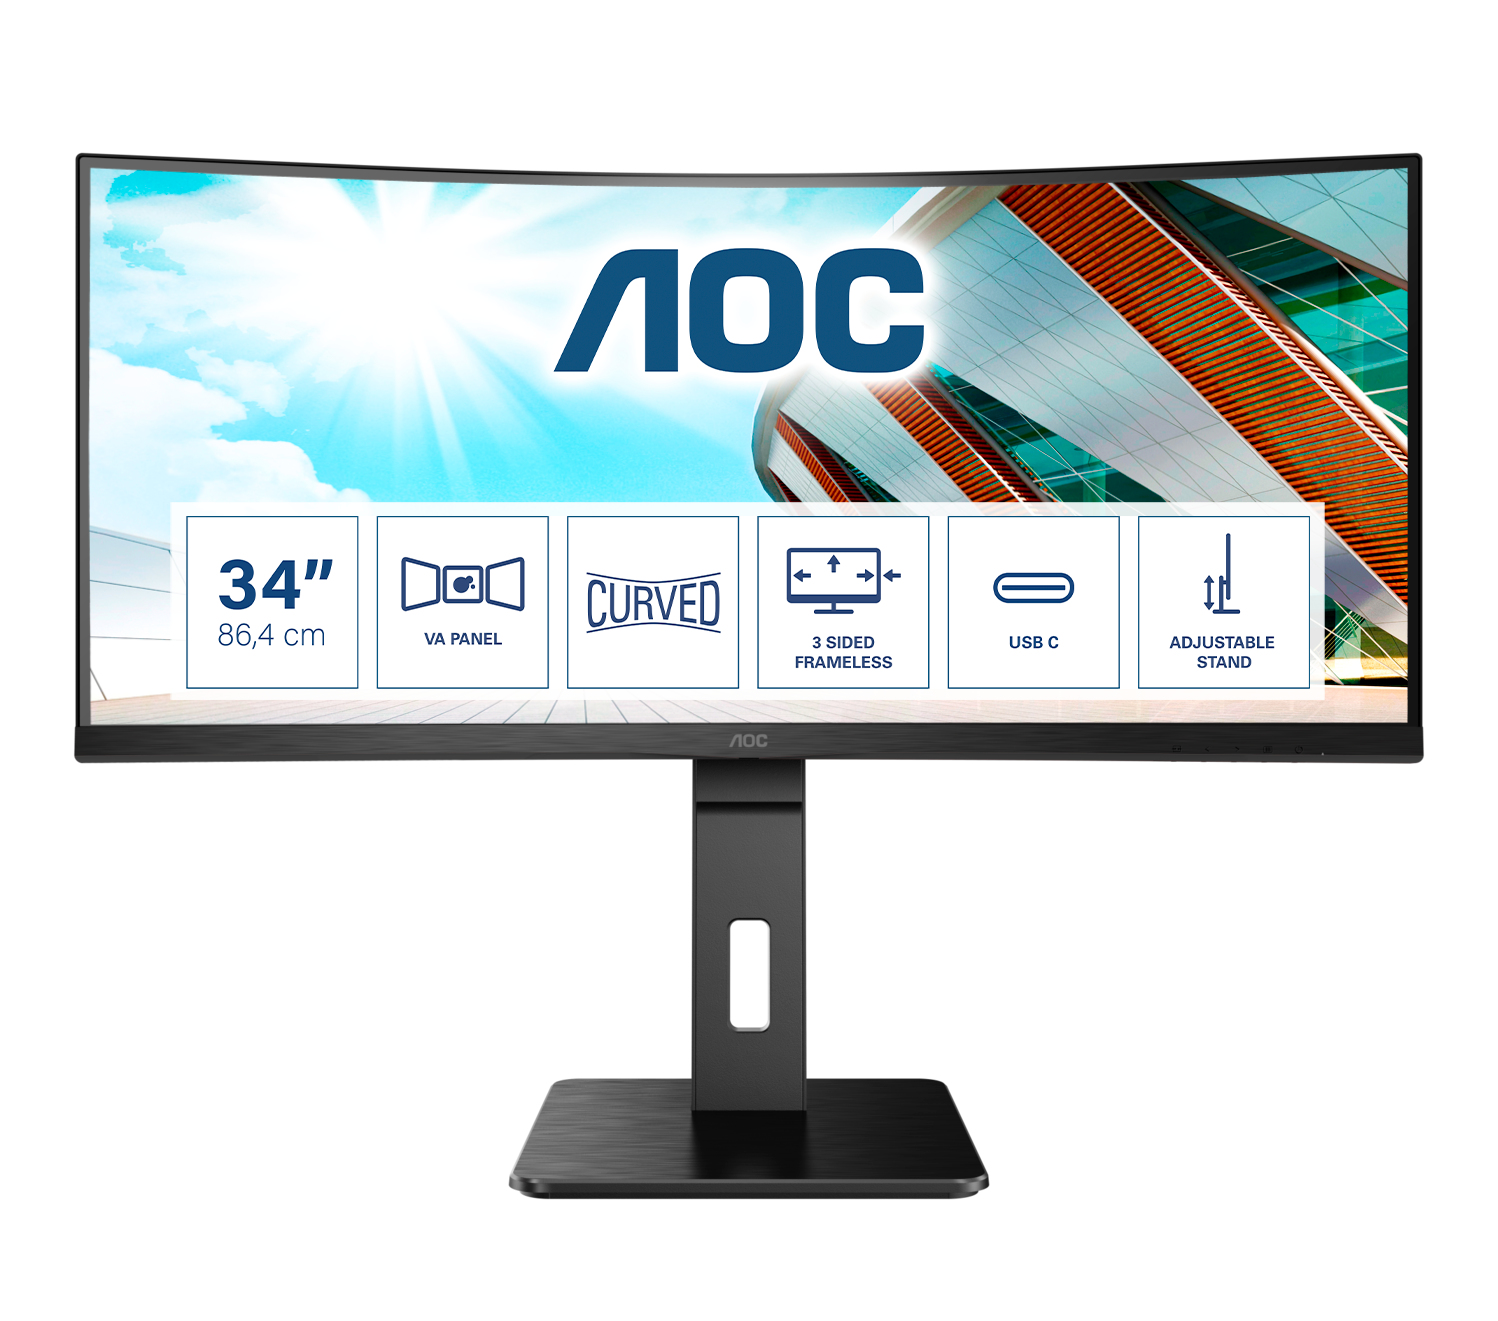 Screen size (inch) 34, Panel resolution 3440x1440, Refresh rate 100 Hz, Response time MPRT 1 ms, Panel type VA, USB-C connectivity USB-C 3.2 x 1 (DP alt mode, upstream, power delivery up to 65 W), HDMI HDMI 2.0 x 1, Display Port DisplayPort 1.2 x 1, Sync 